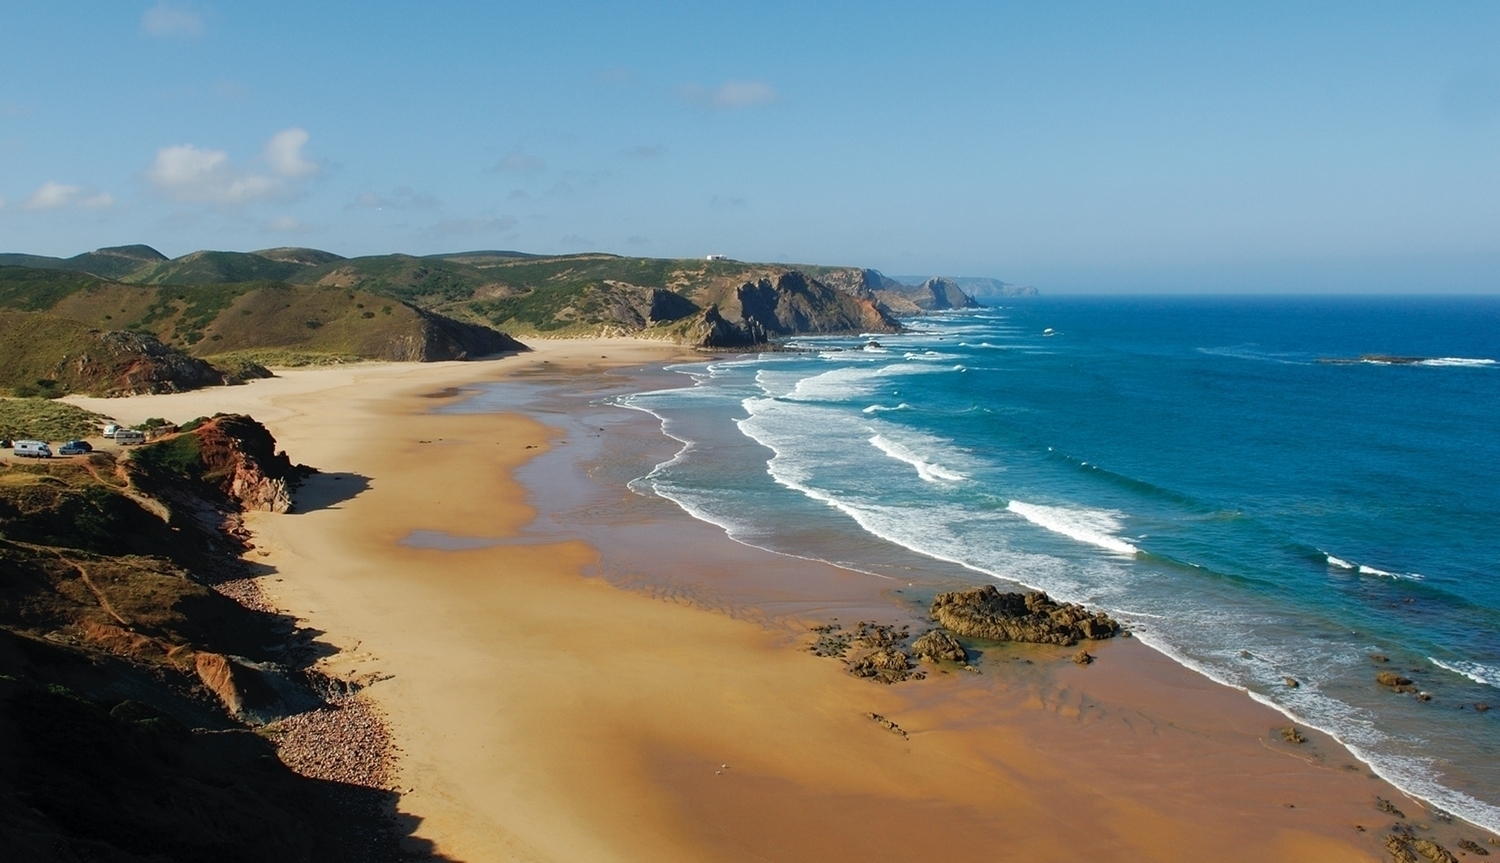 Blog - The Top surf beaches in the Algarve, Portugal